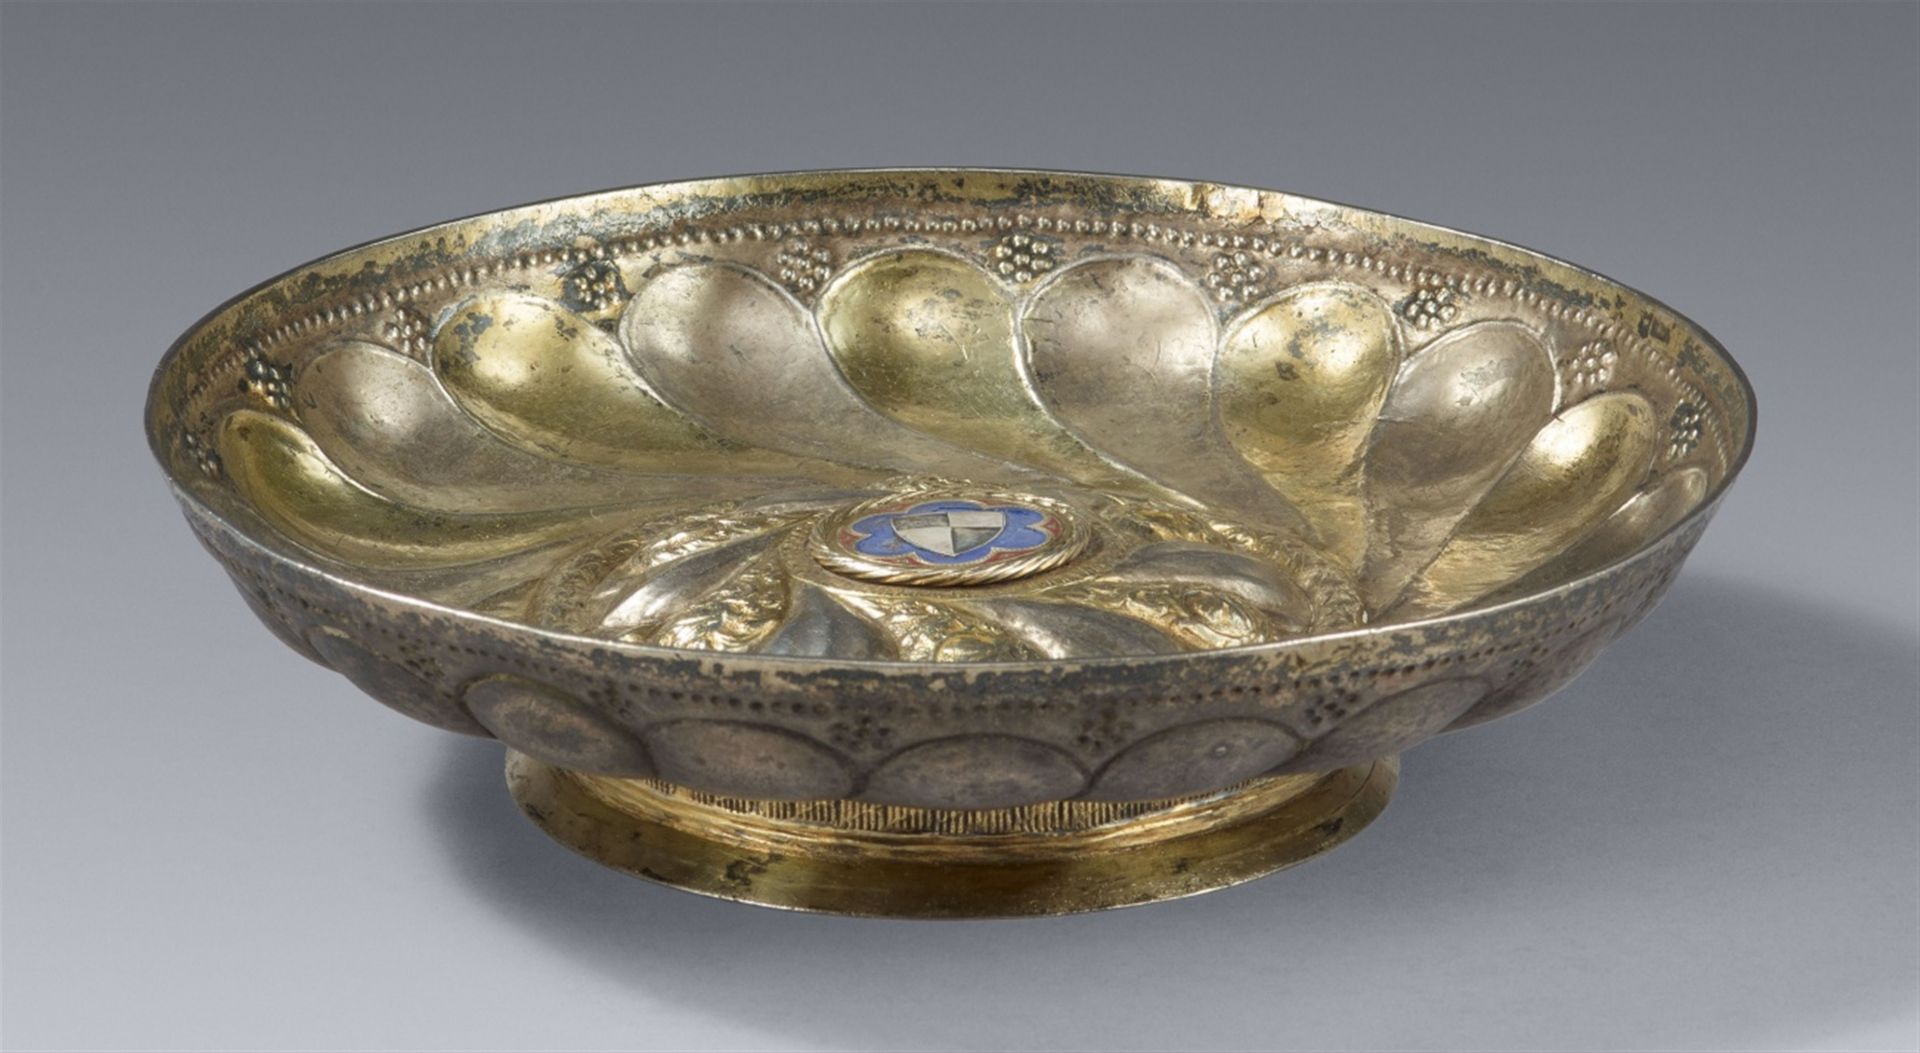 A magnificent late Gothic parcel gilt silver tazza with the coat-of-arms of the Counts of Collalto - Image 3 of 3